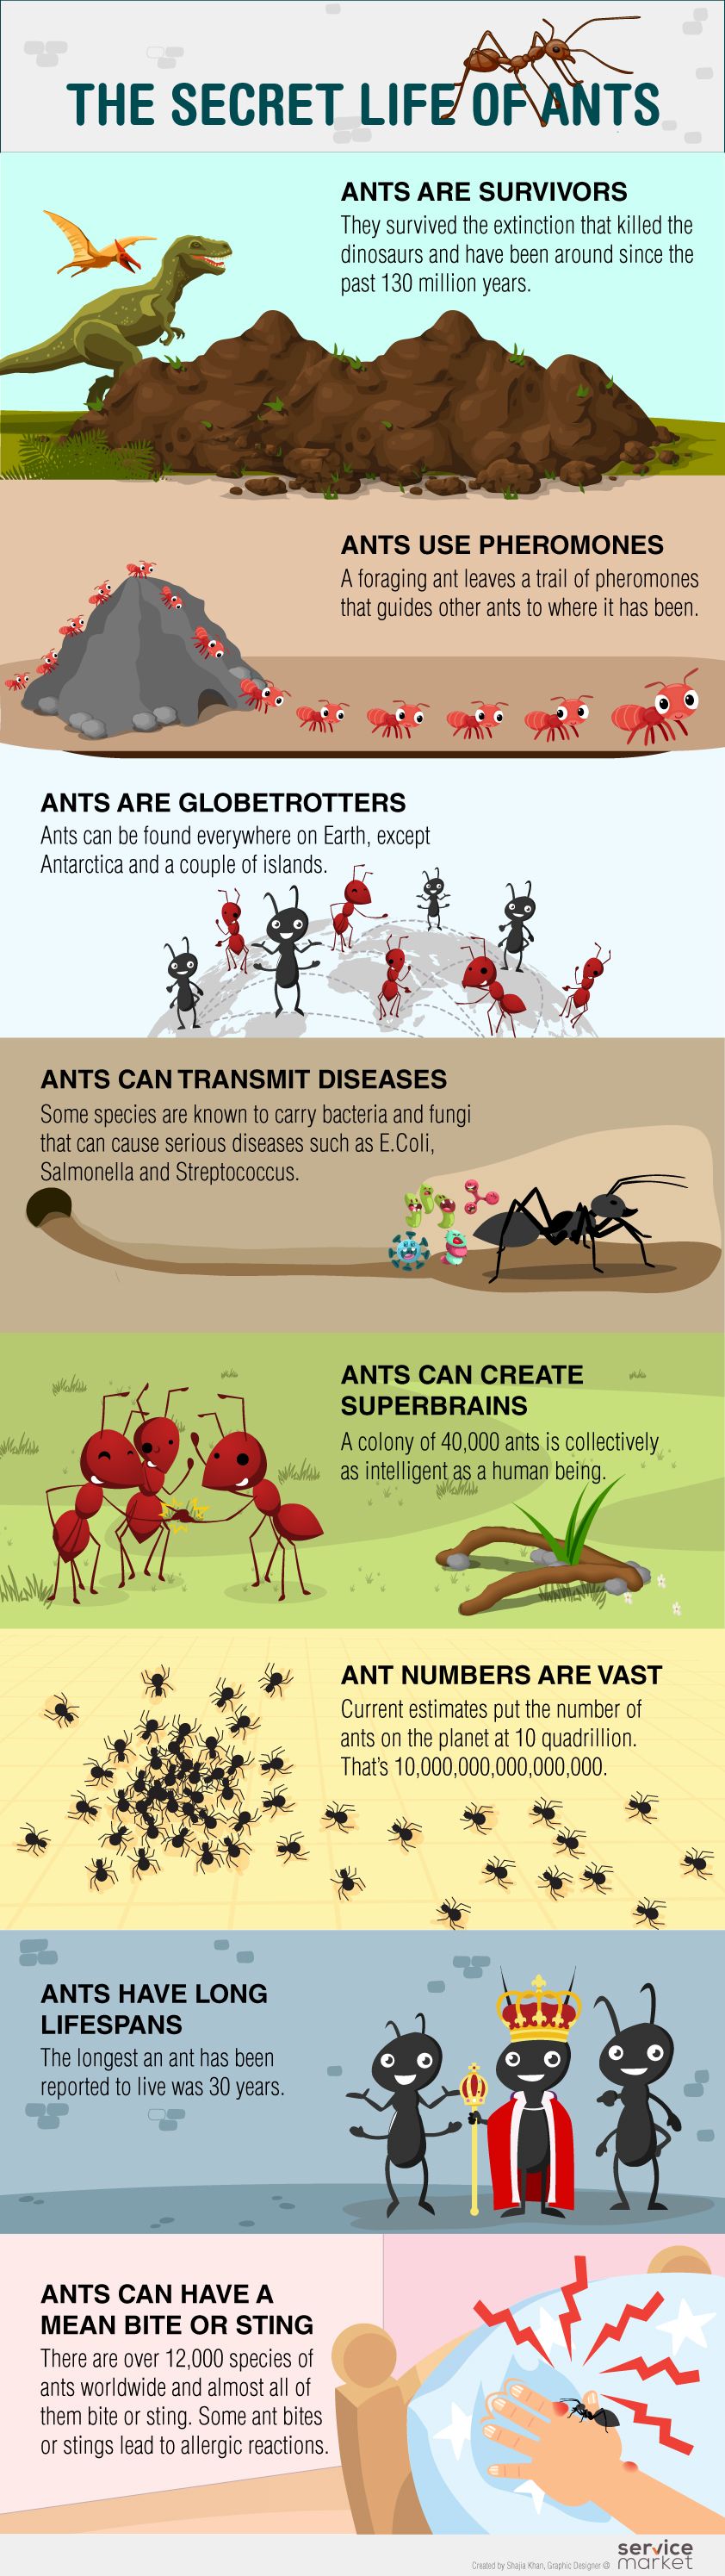 Facts about ants - pest control in Dubai 